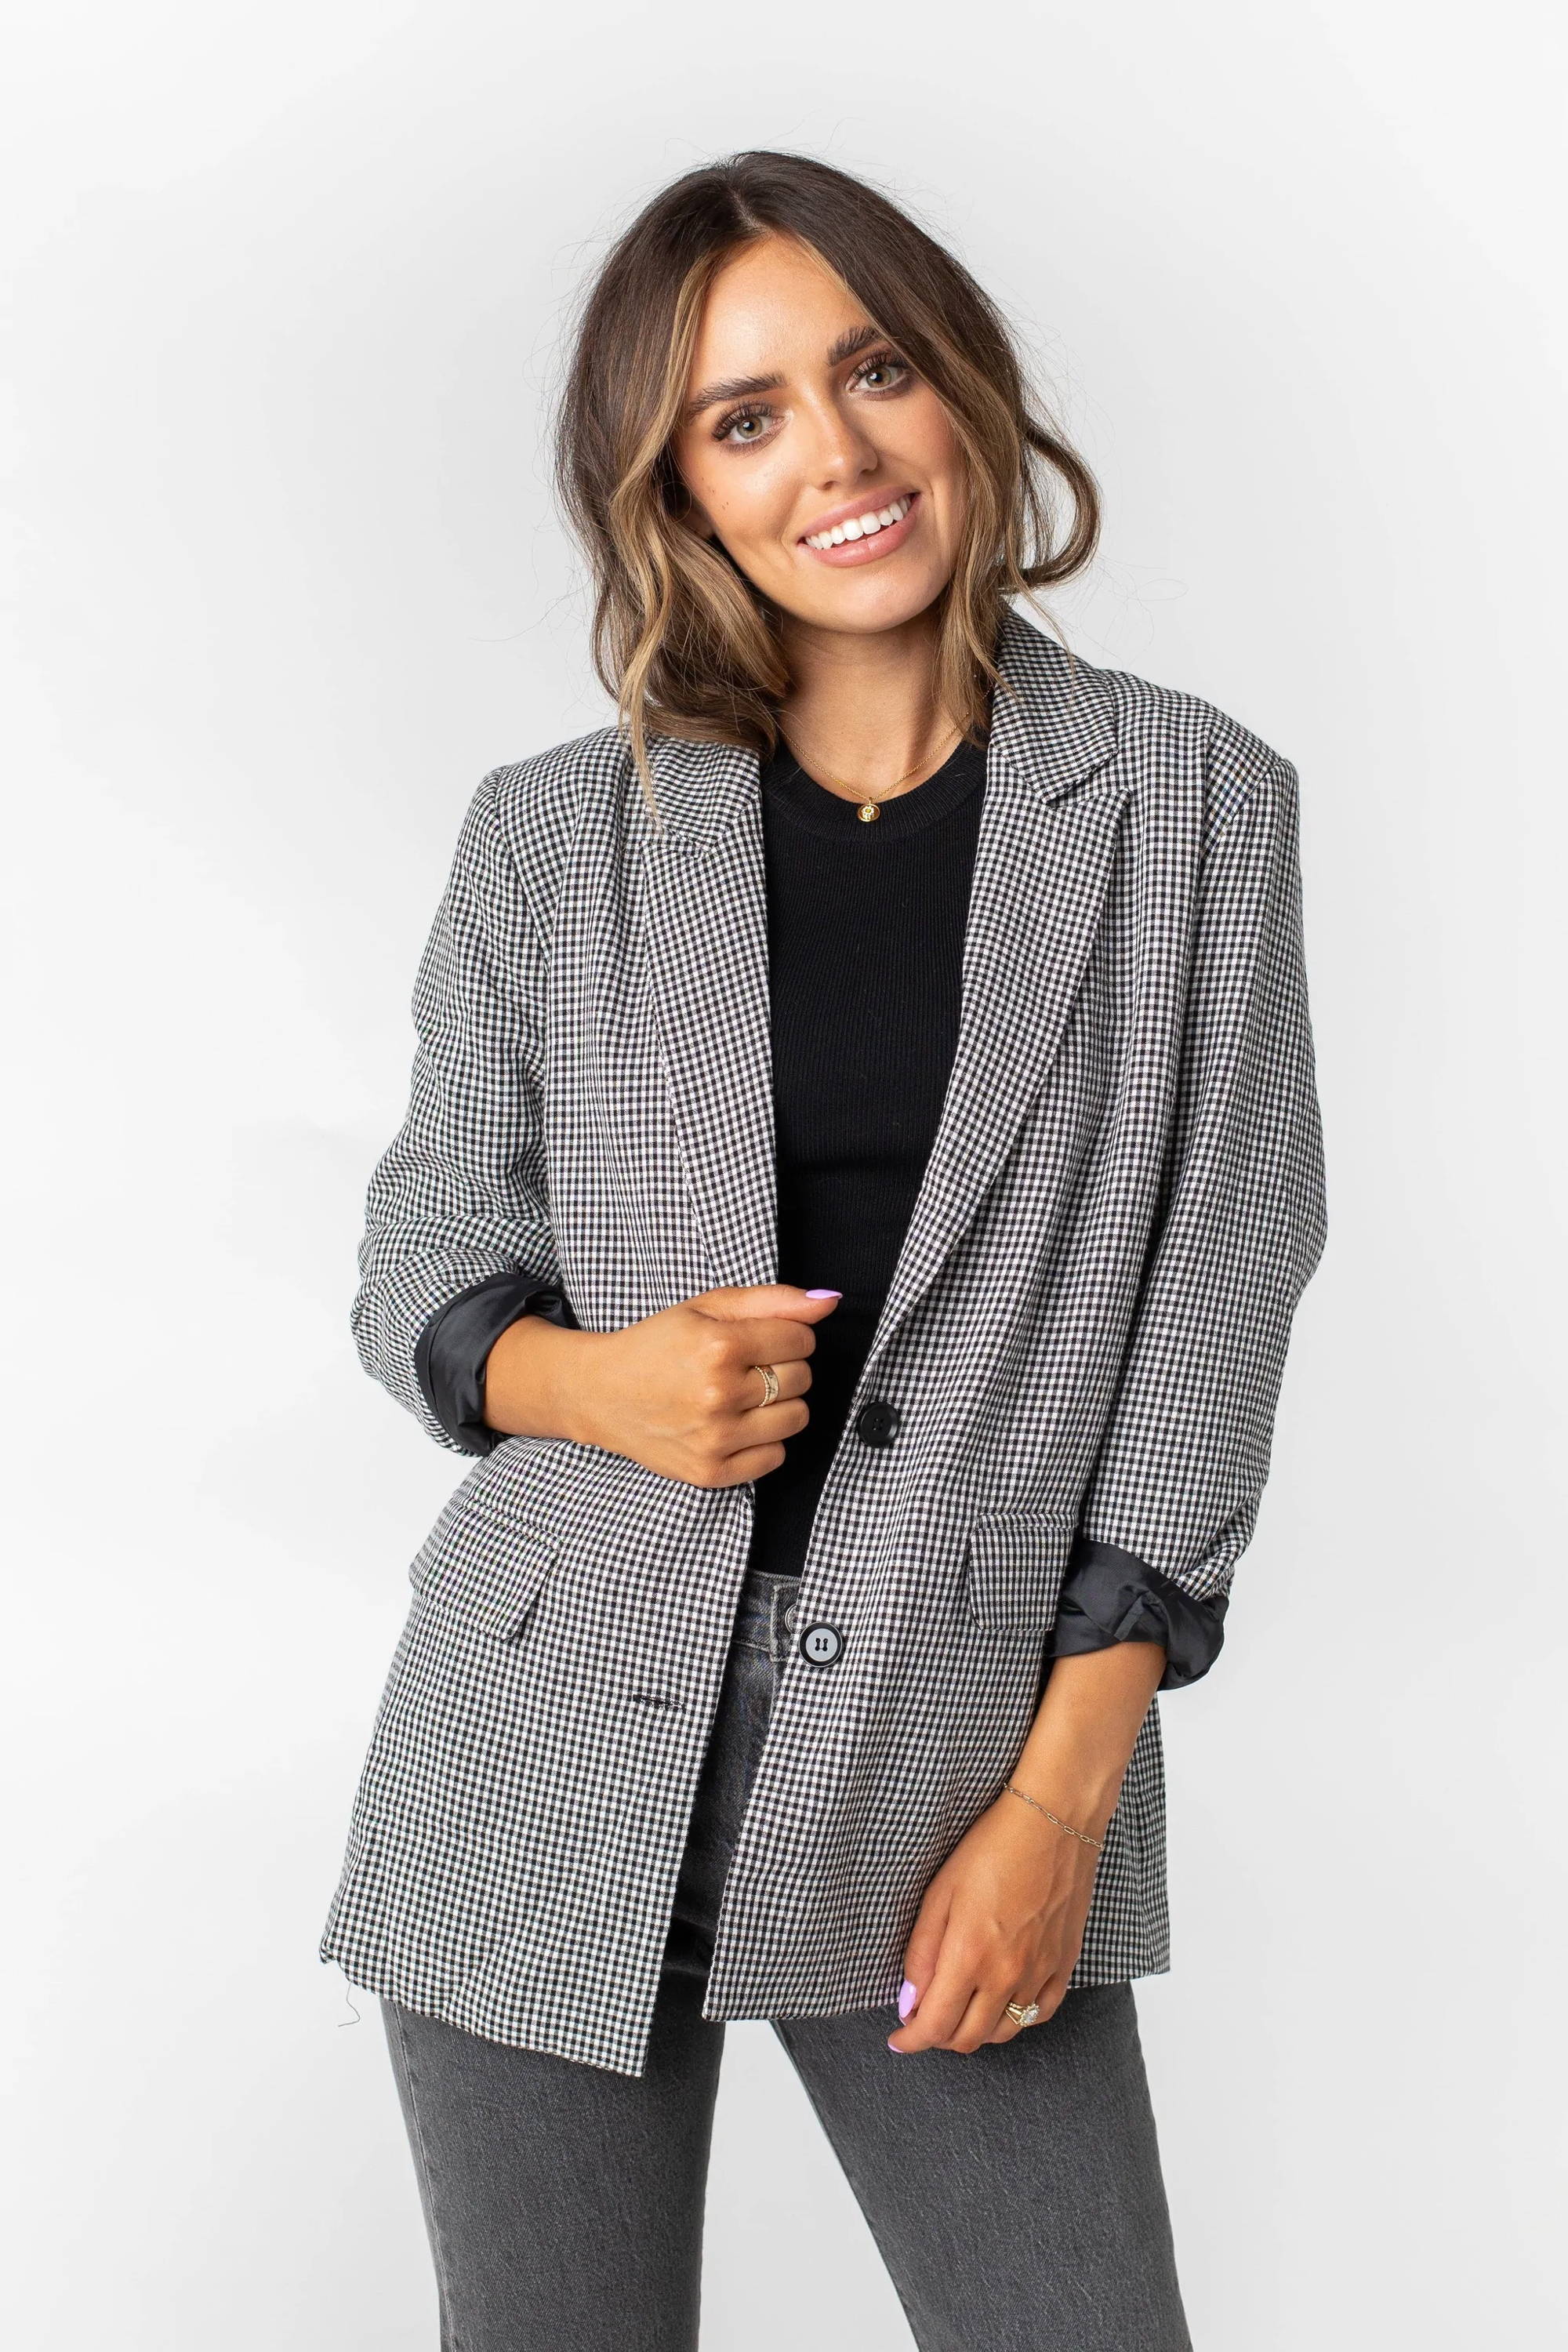 A woman poses in a black and white checkered blazer